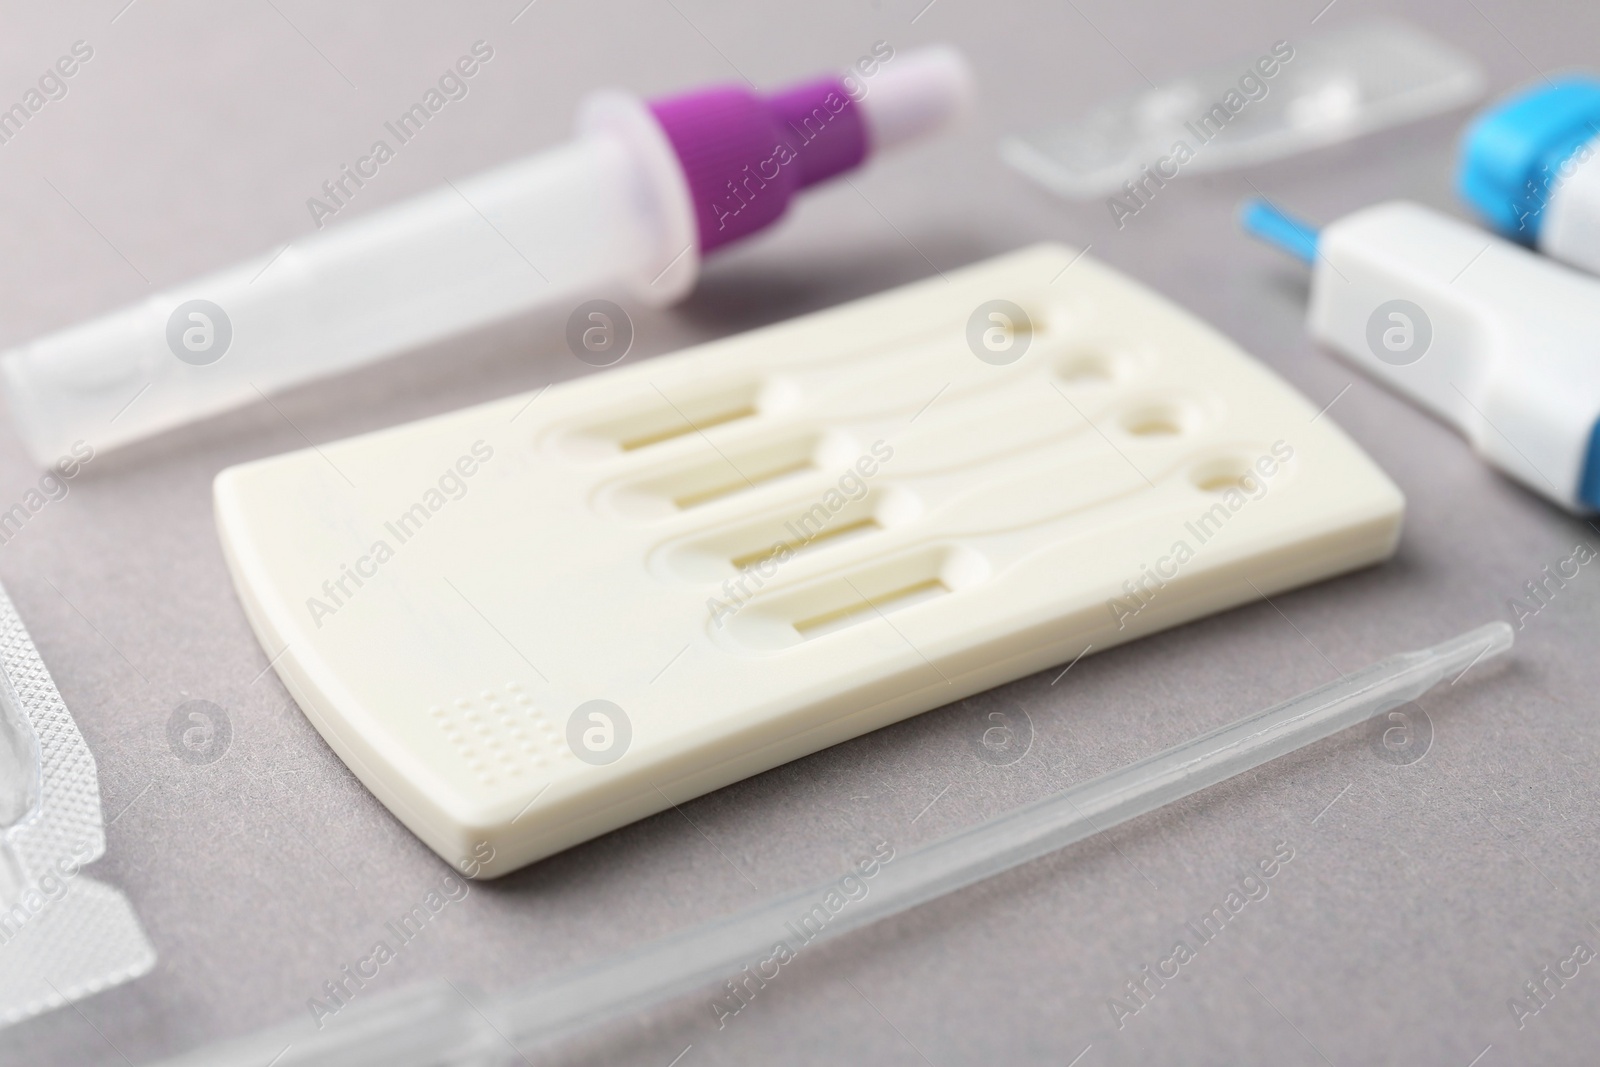 Photo of Disposable express test kit on grey background, closeup